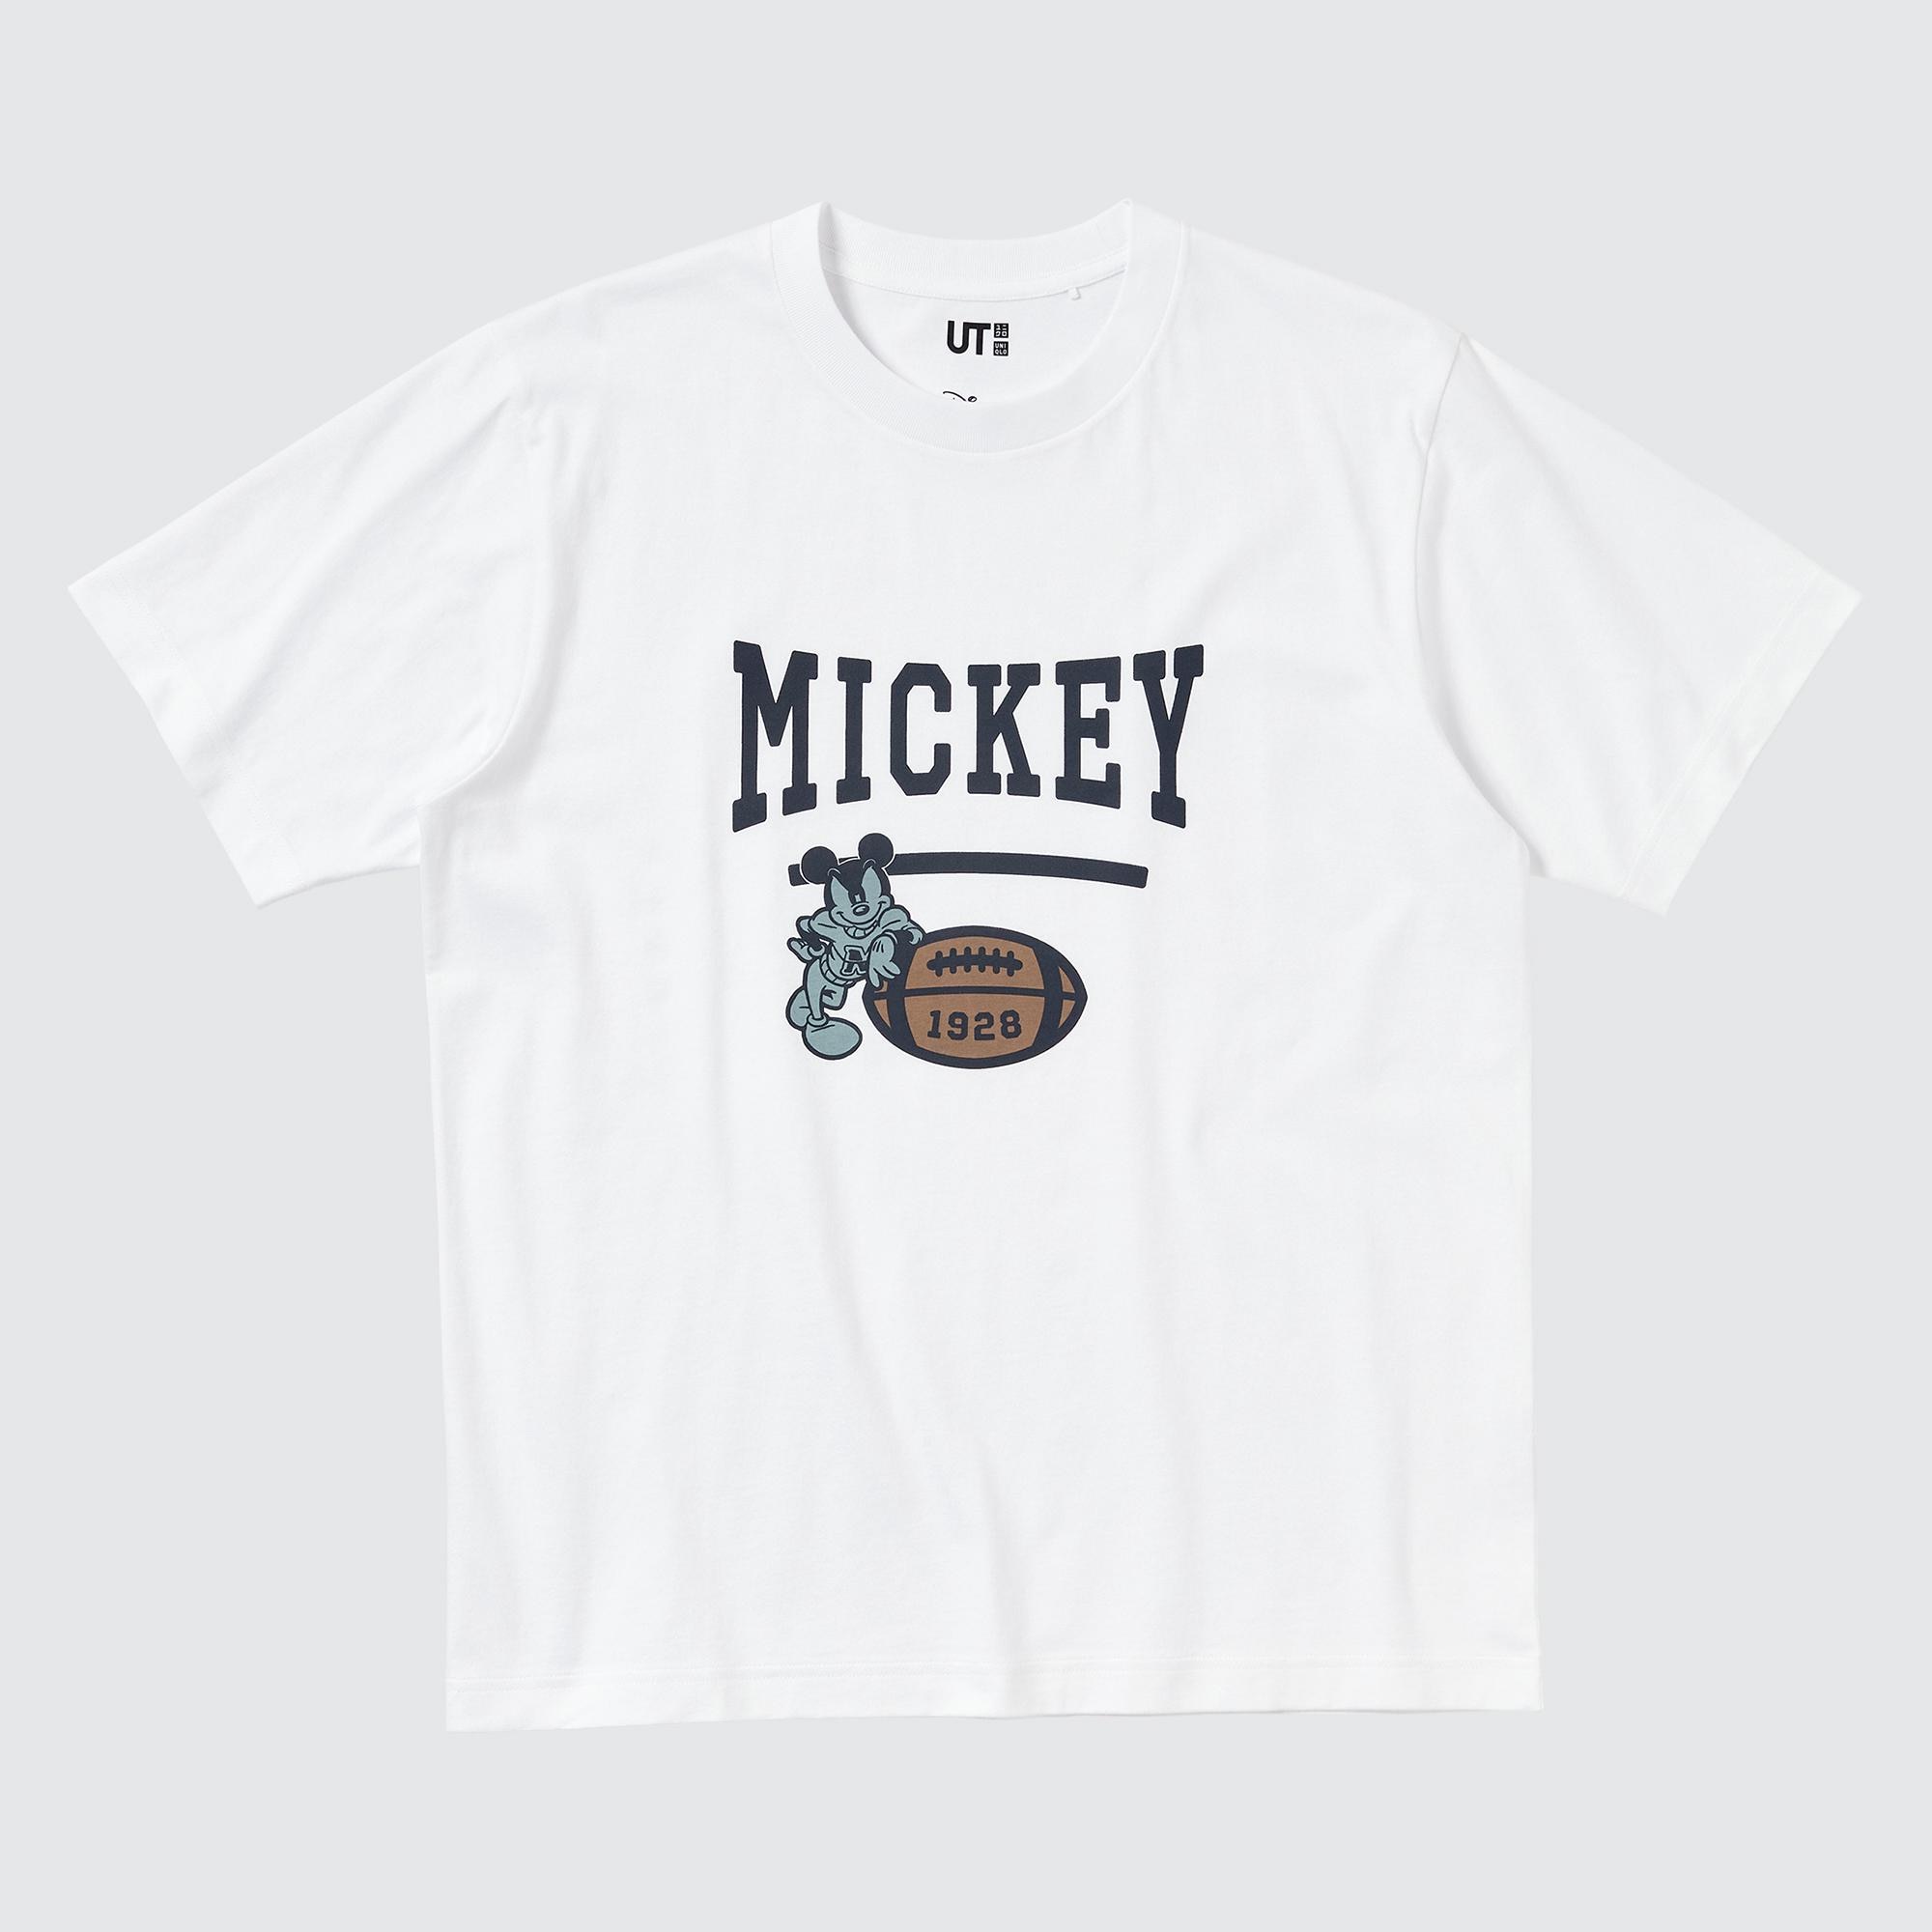 Disney Fans Check Out These Mickey Mouse Tees From Uniqlo